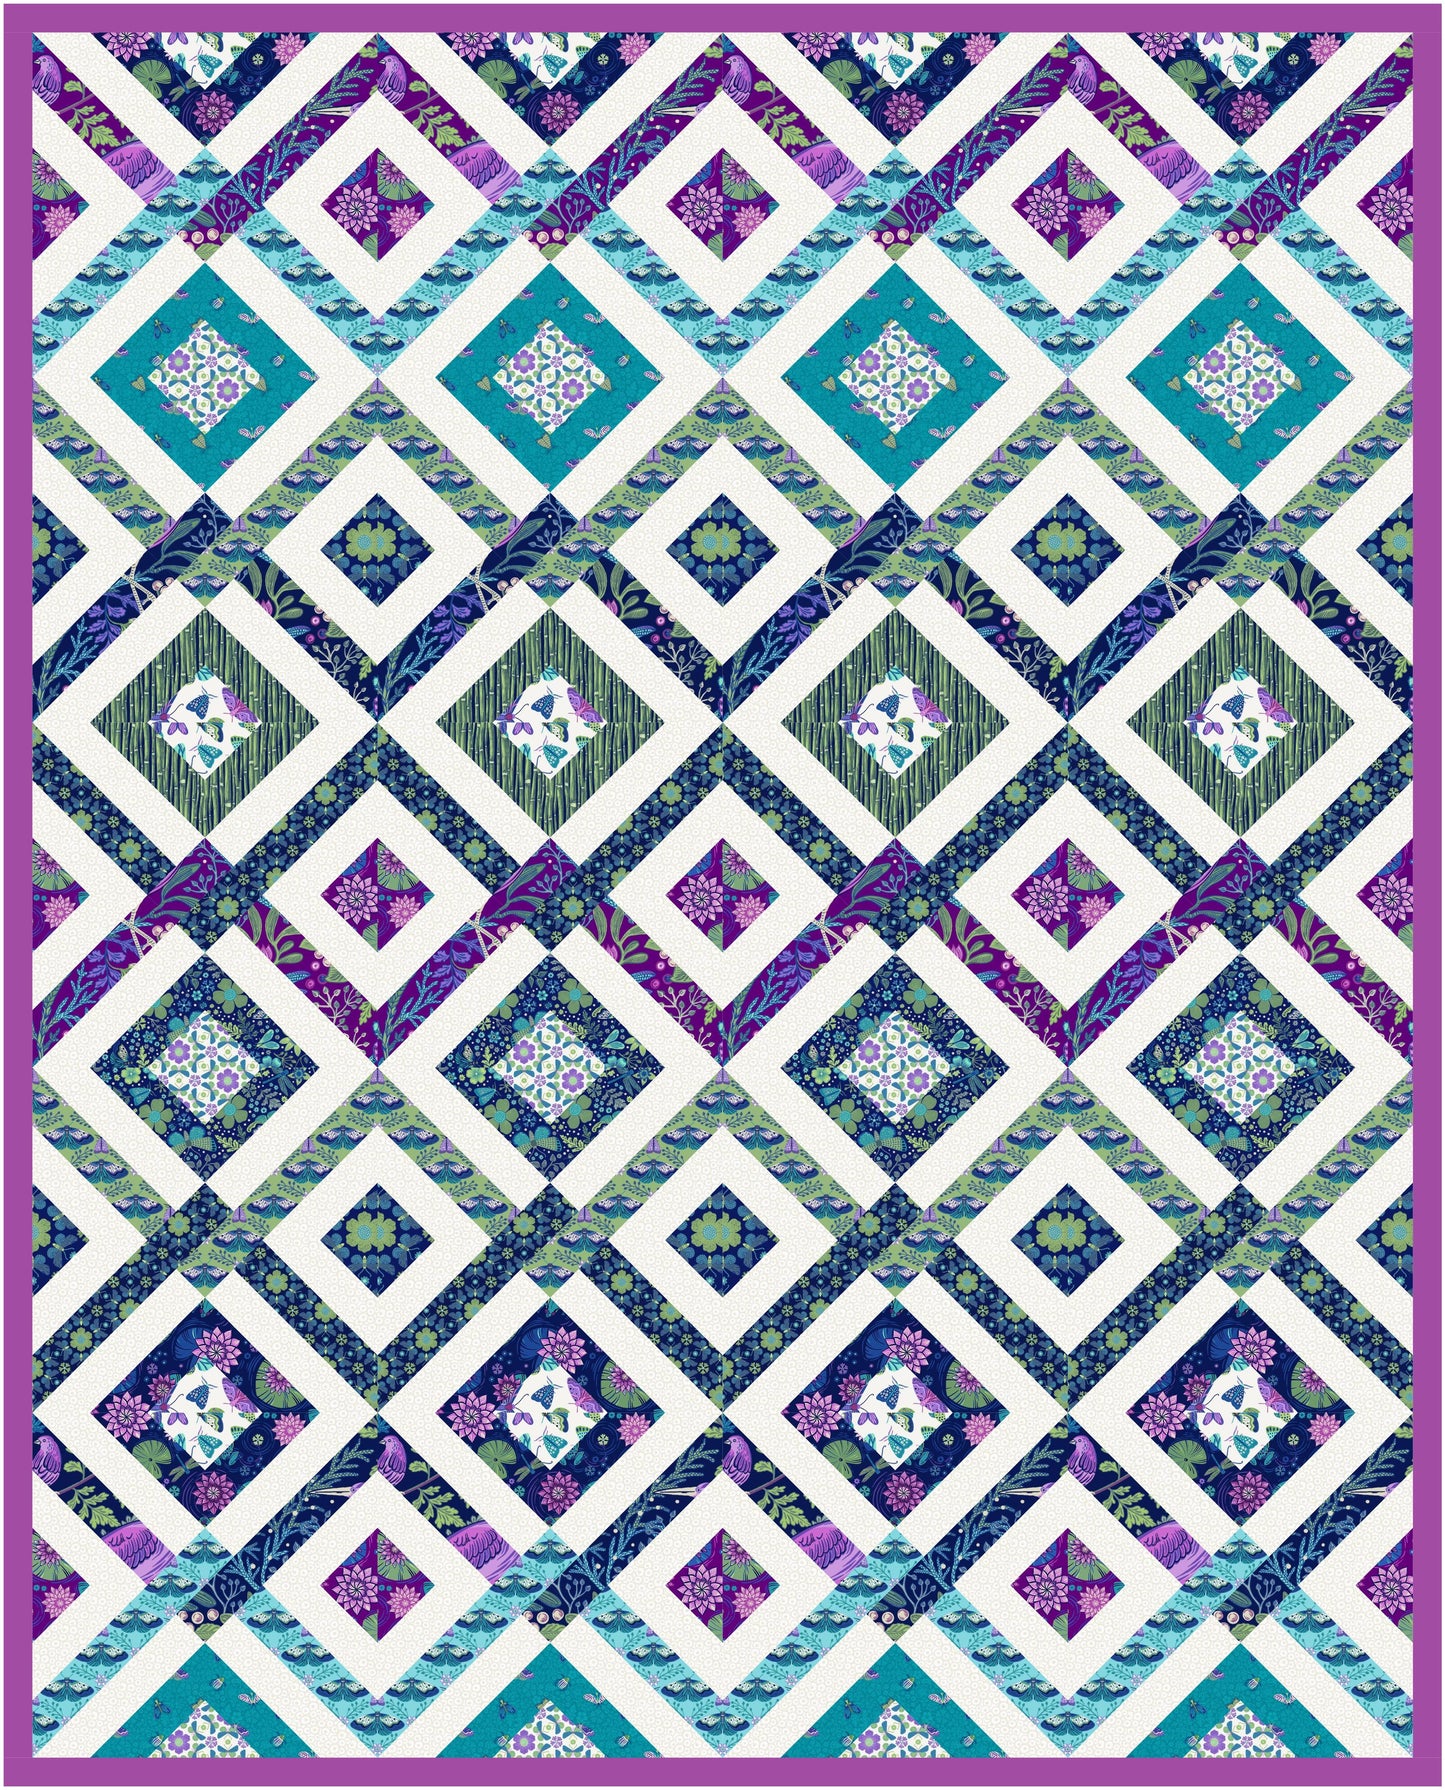 Water's Edge Entangled Quilt Pattern - Wholesale bundle of 5 Physical Booklets